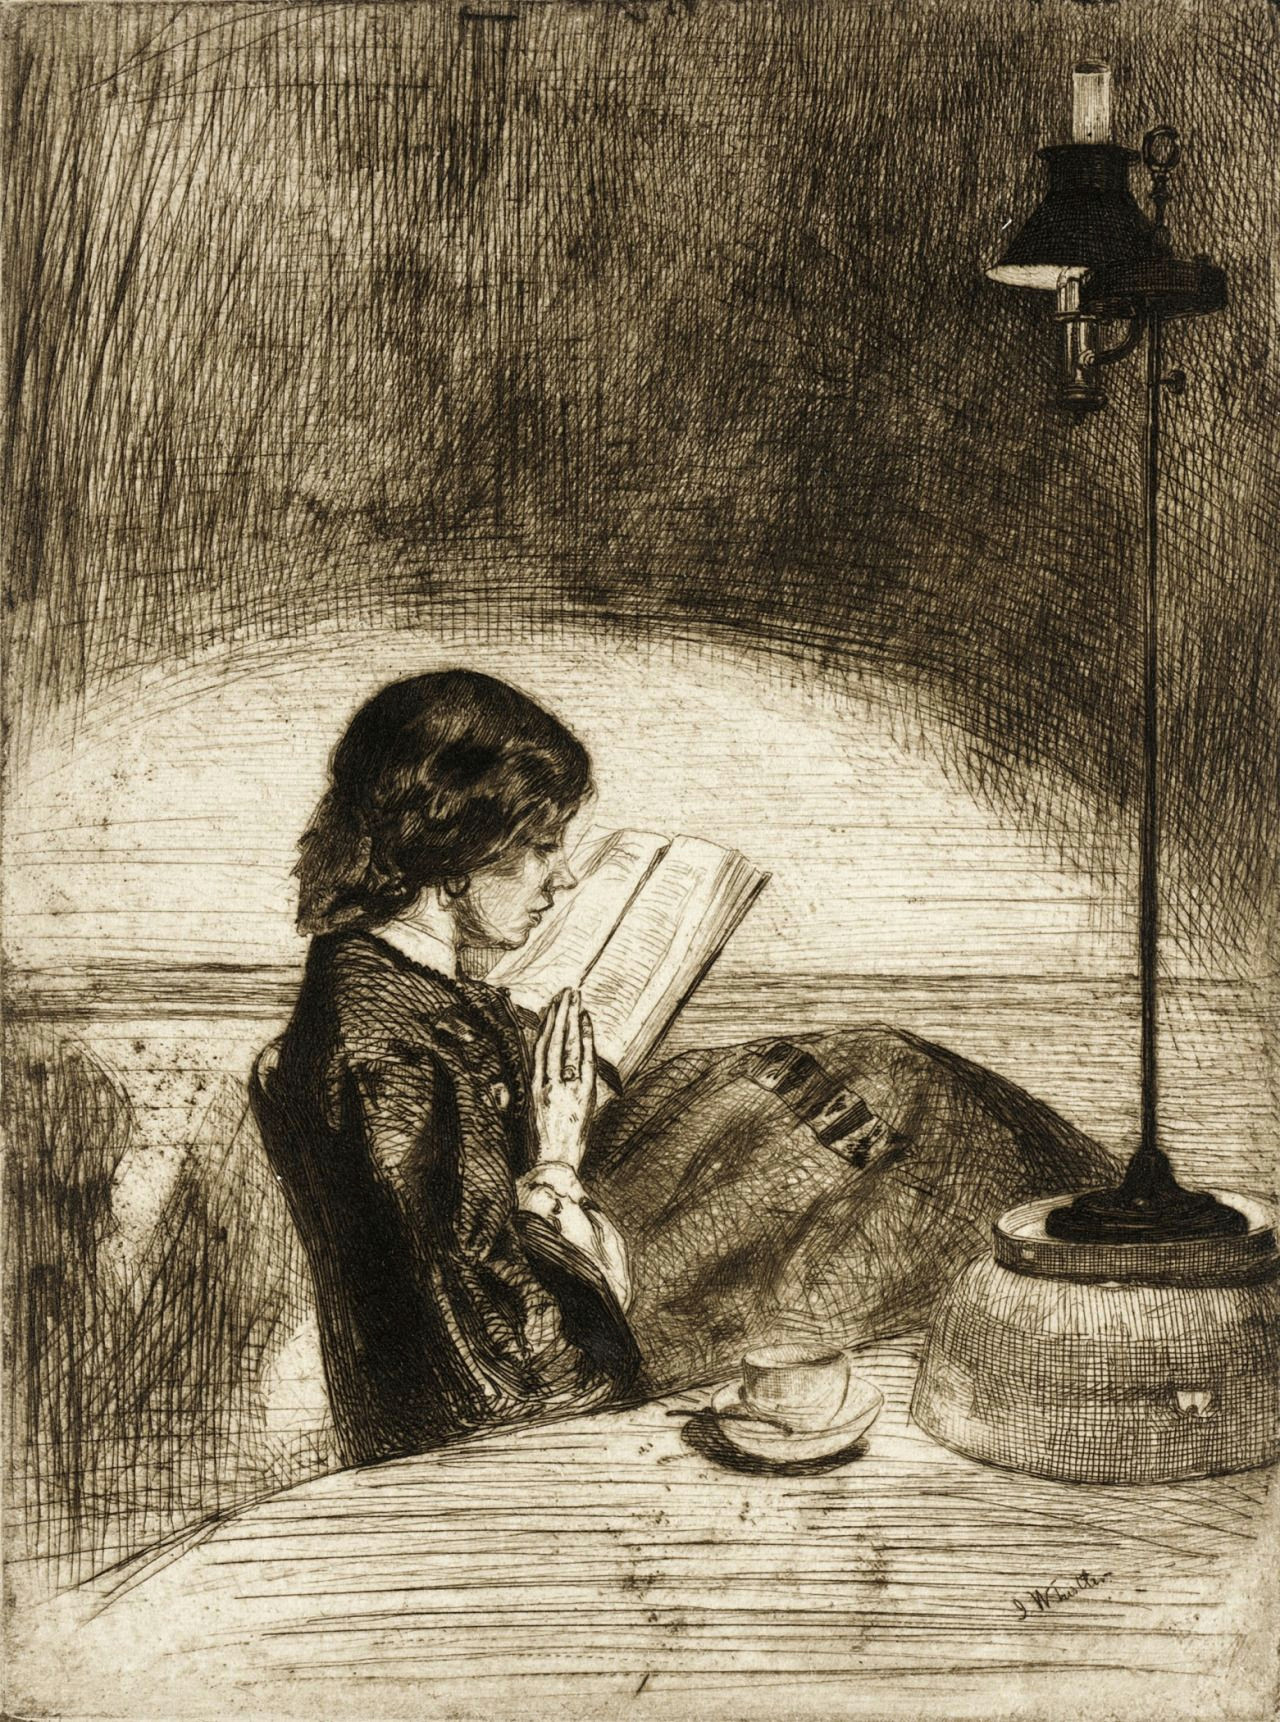 james abbott mcneill whistler 1834 1903 reading by lamplight etching c1859